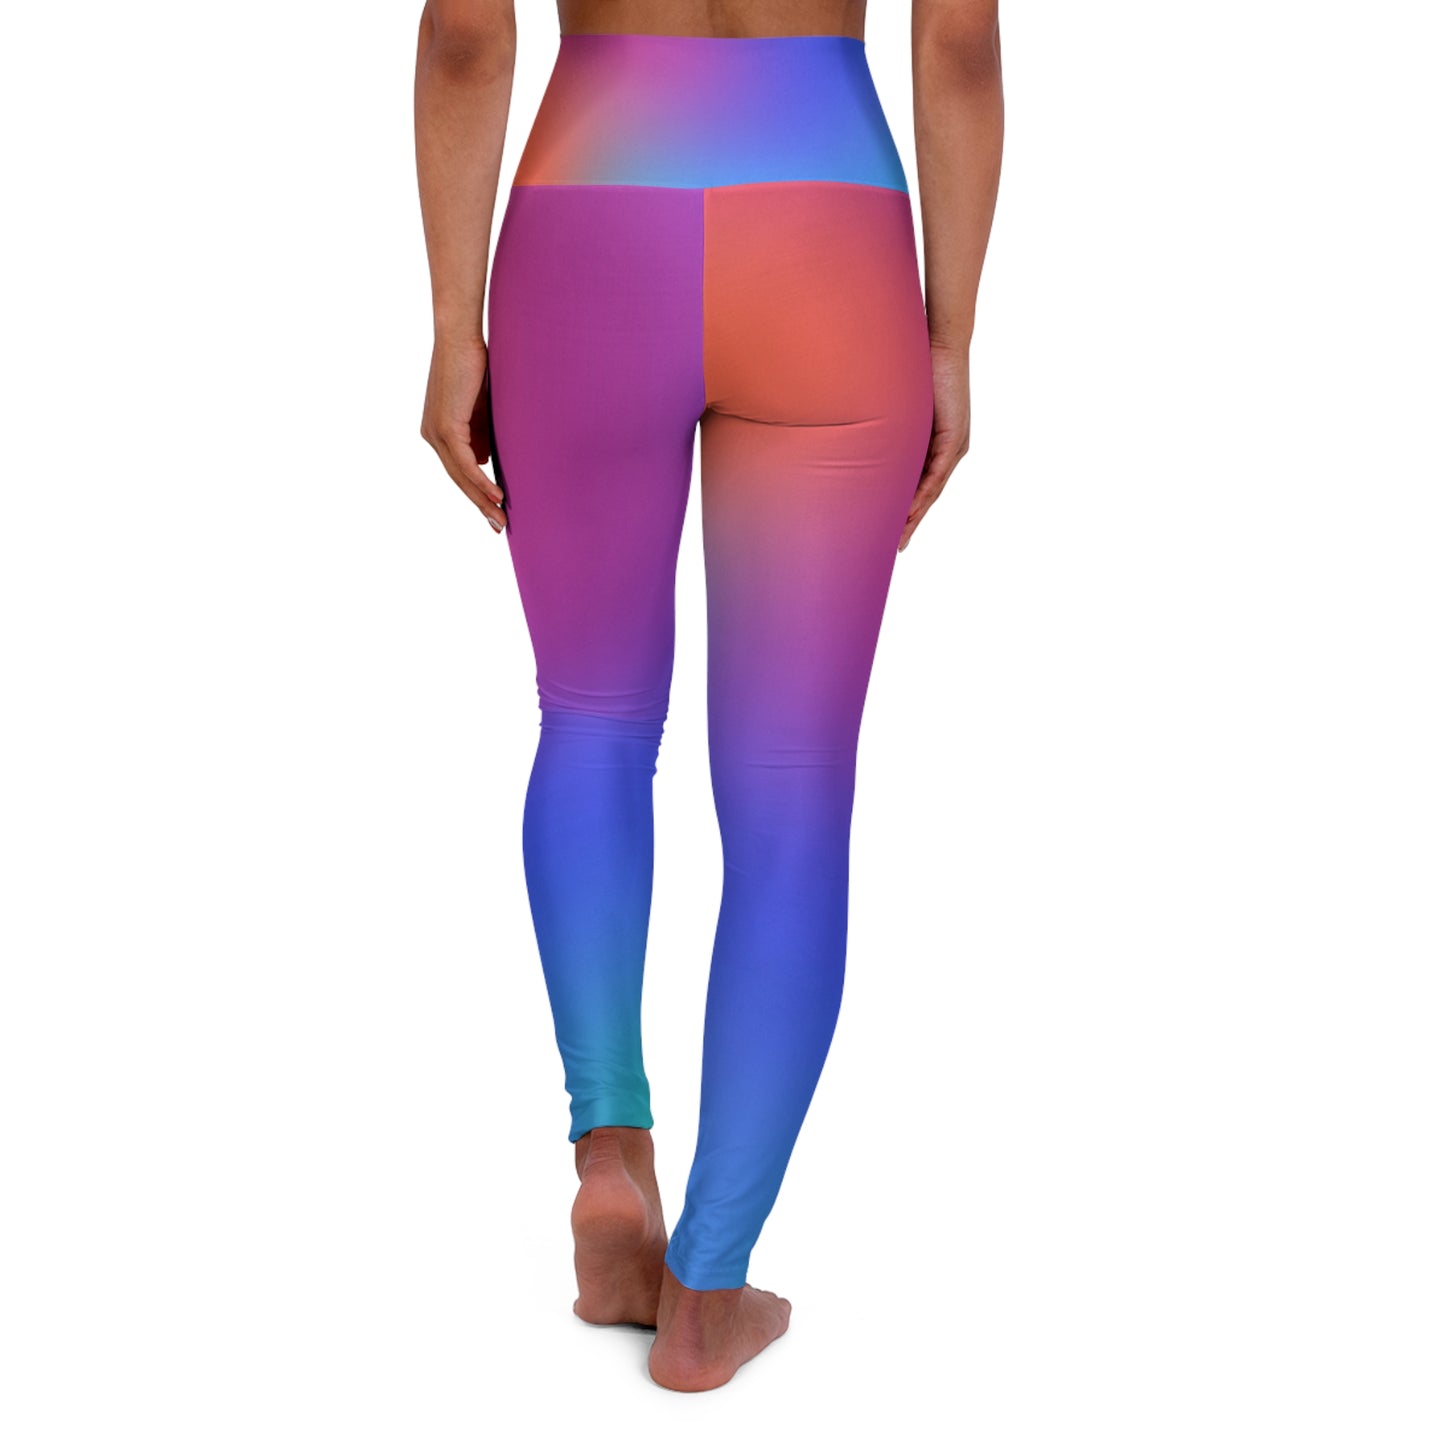 Rainbow Slide Artistic Abstract Skinny Fit High Waisted Yoga Leggings, Expertly Crafted in the USA